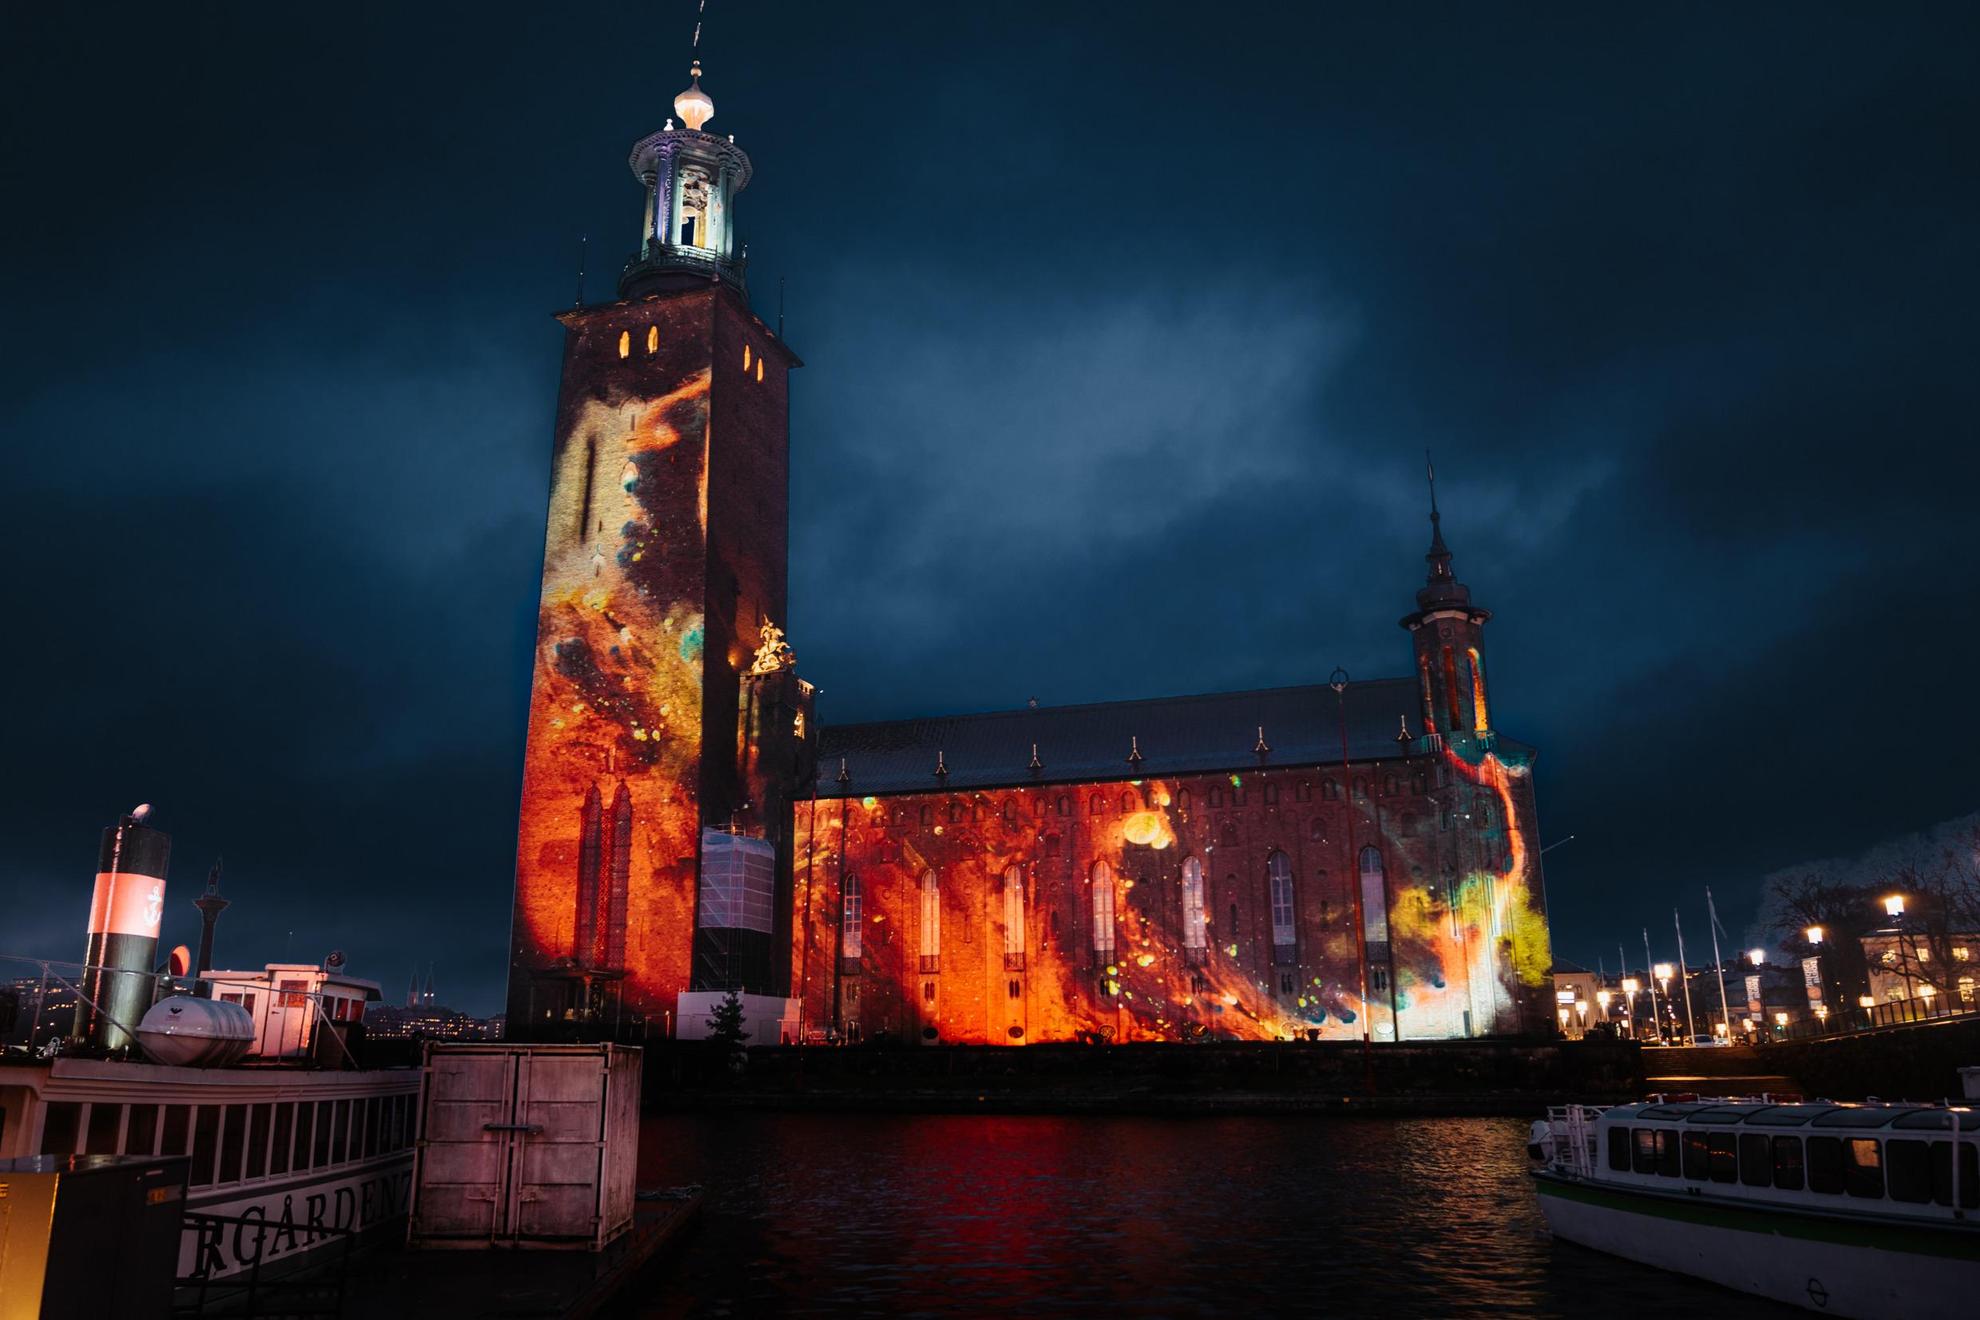 Stockholm City Hall located next to the water is illuminated by a light display during the night.